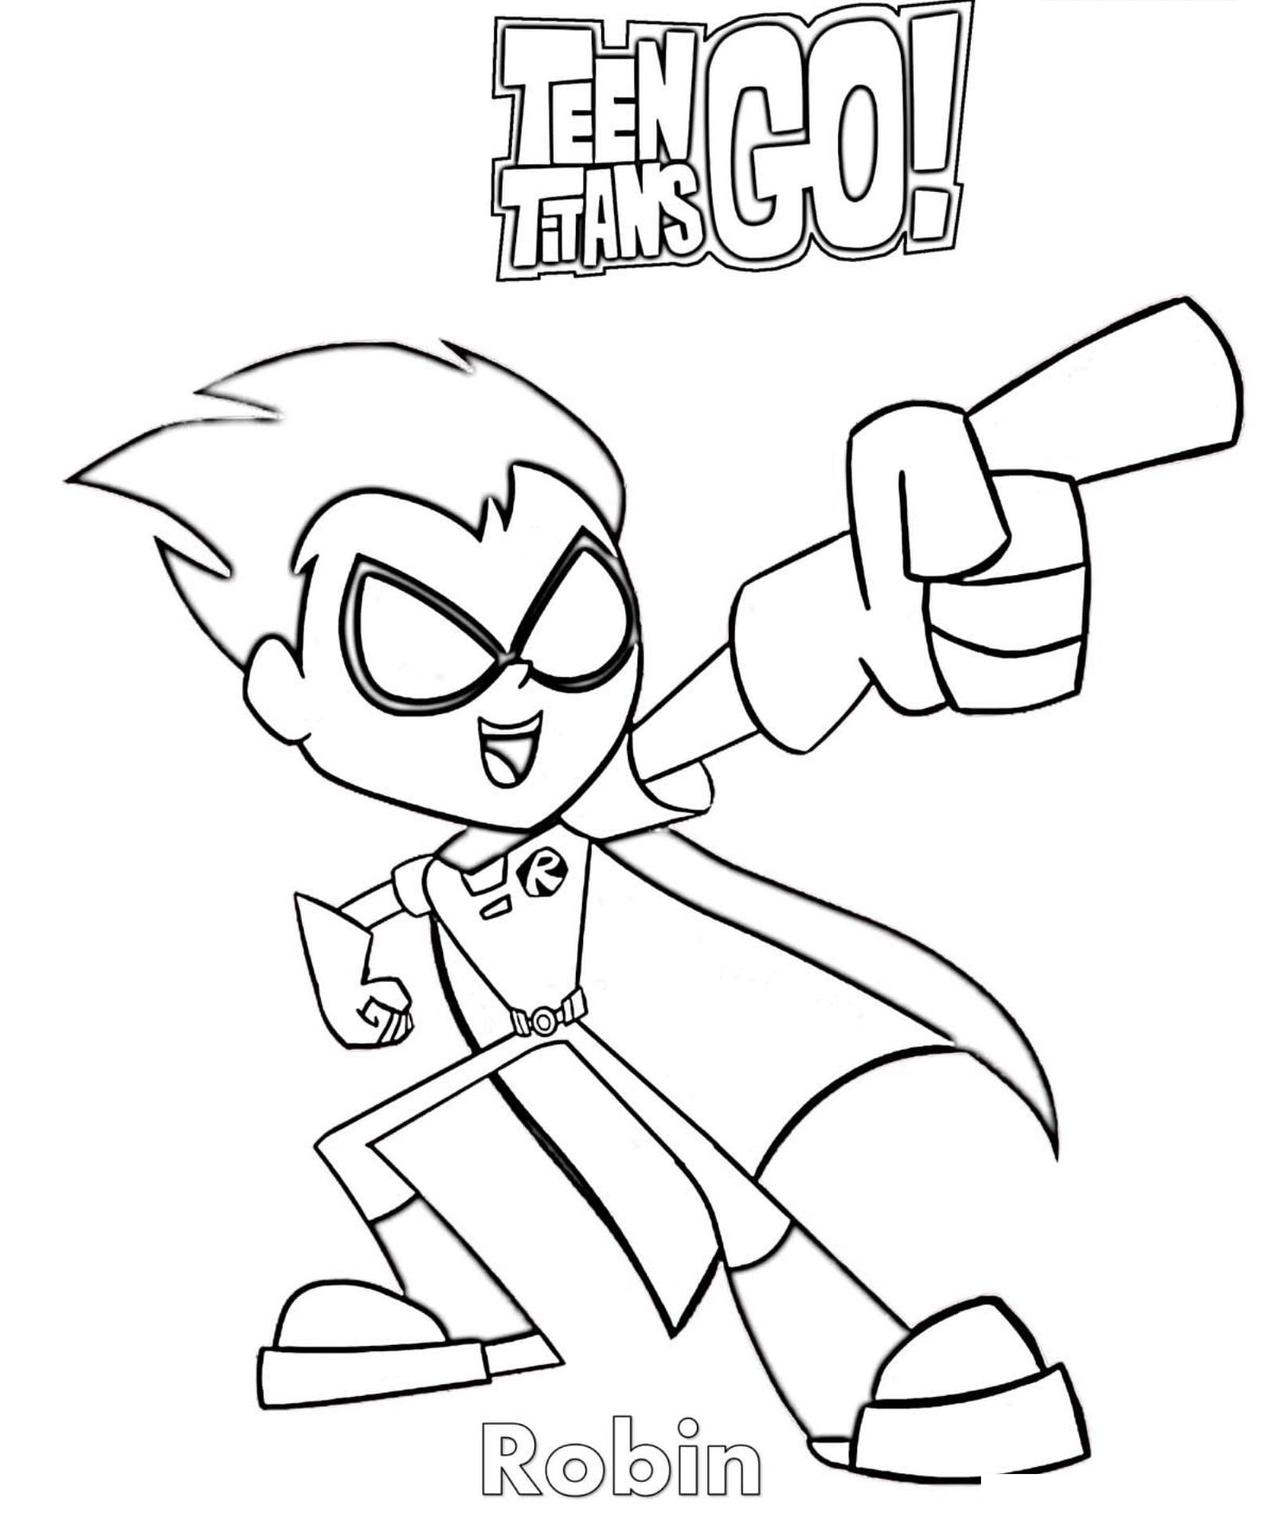 Free Teen Titans Go Hero Robin Coloring Pages printable